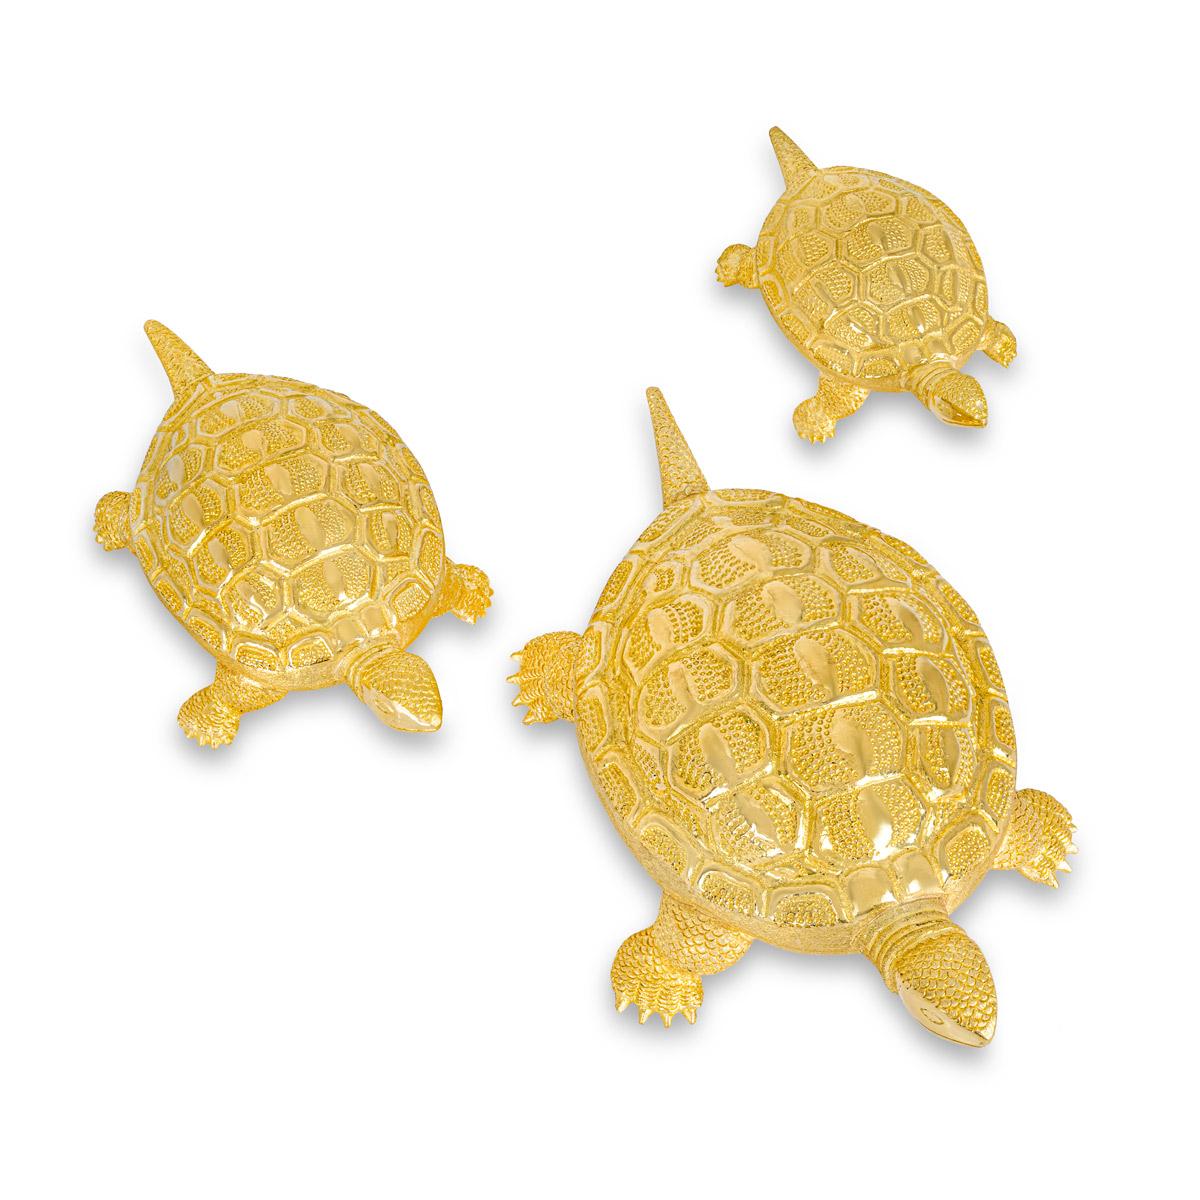 A charming set of three turtles set in 22k yellow gold. The family of turtles consist of large, medium and small turtles. The large turtle measures 7.9mm in length, 4.1mm in width, 2.5mm in depth and has a gross weight of 56.35 grams. The medium